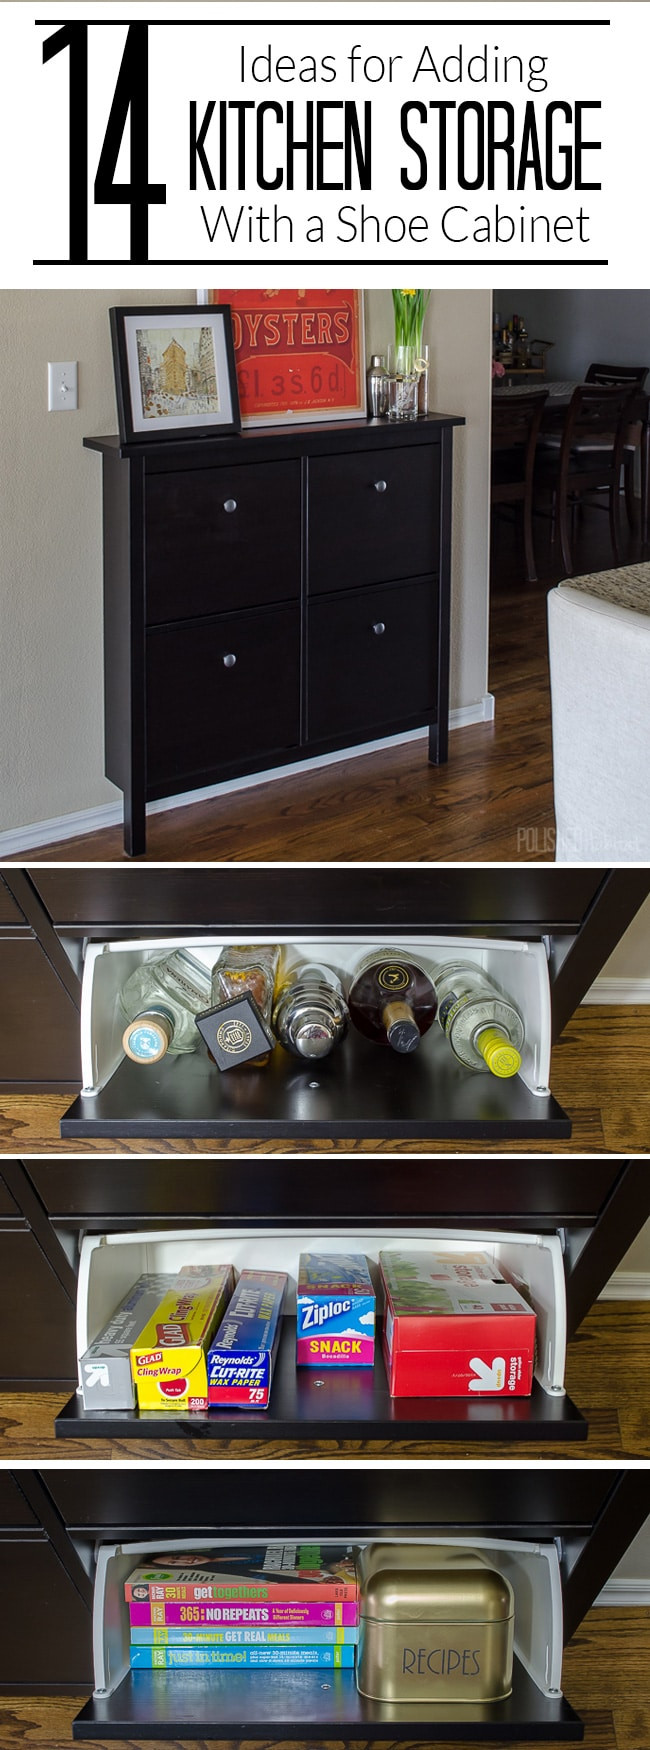 Small Storage Cabinet For Kitchen
 14 Ways To Use an IKEA Shoe Cabinet For Extra Kitchen Storage